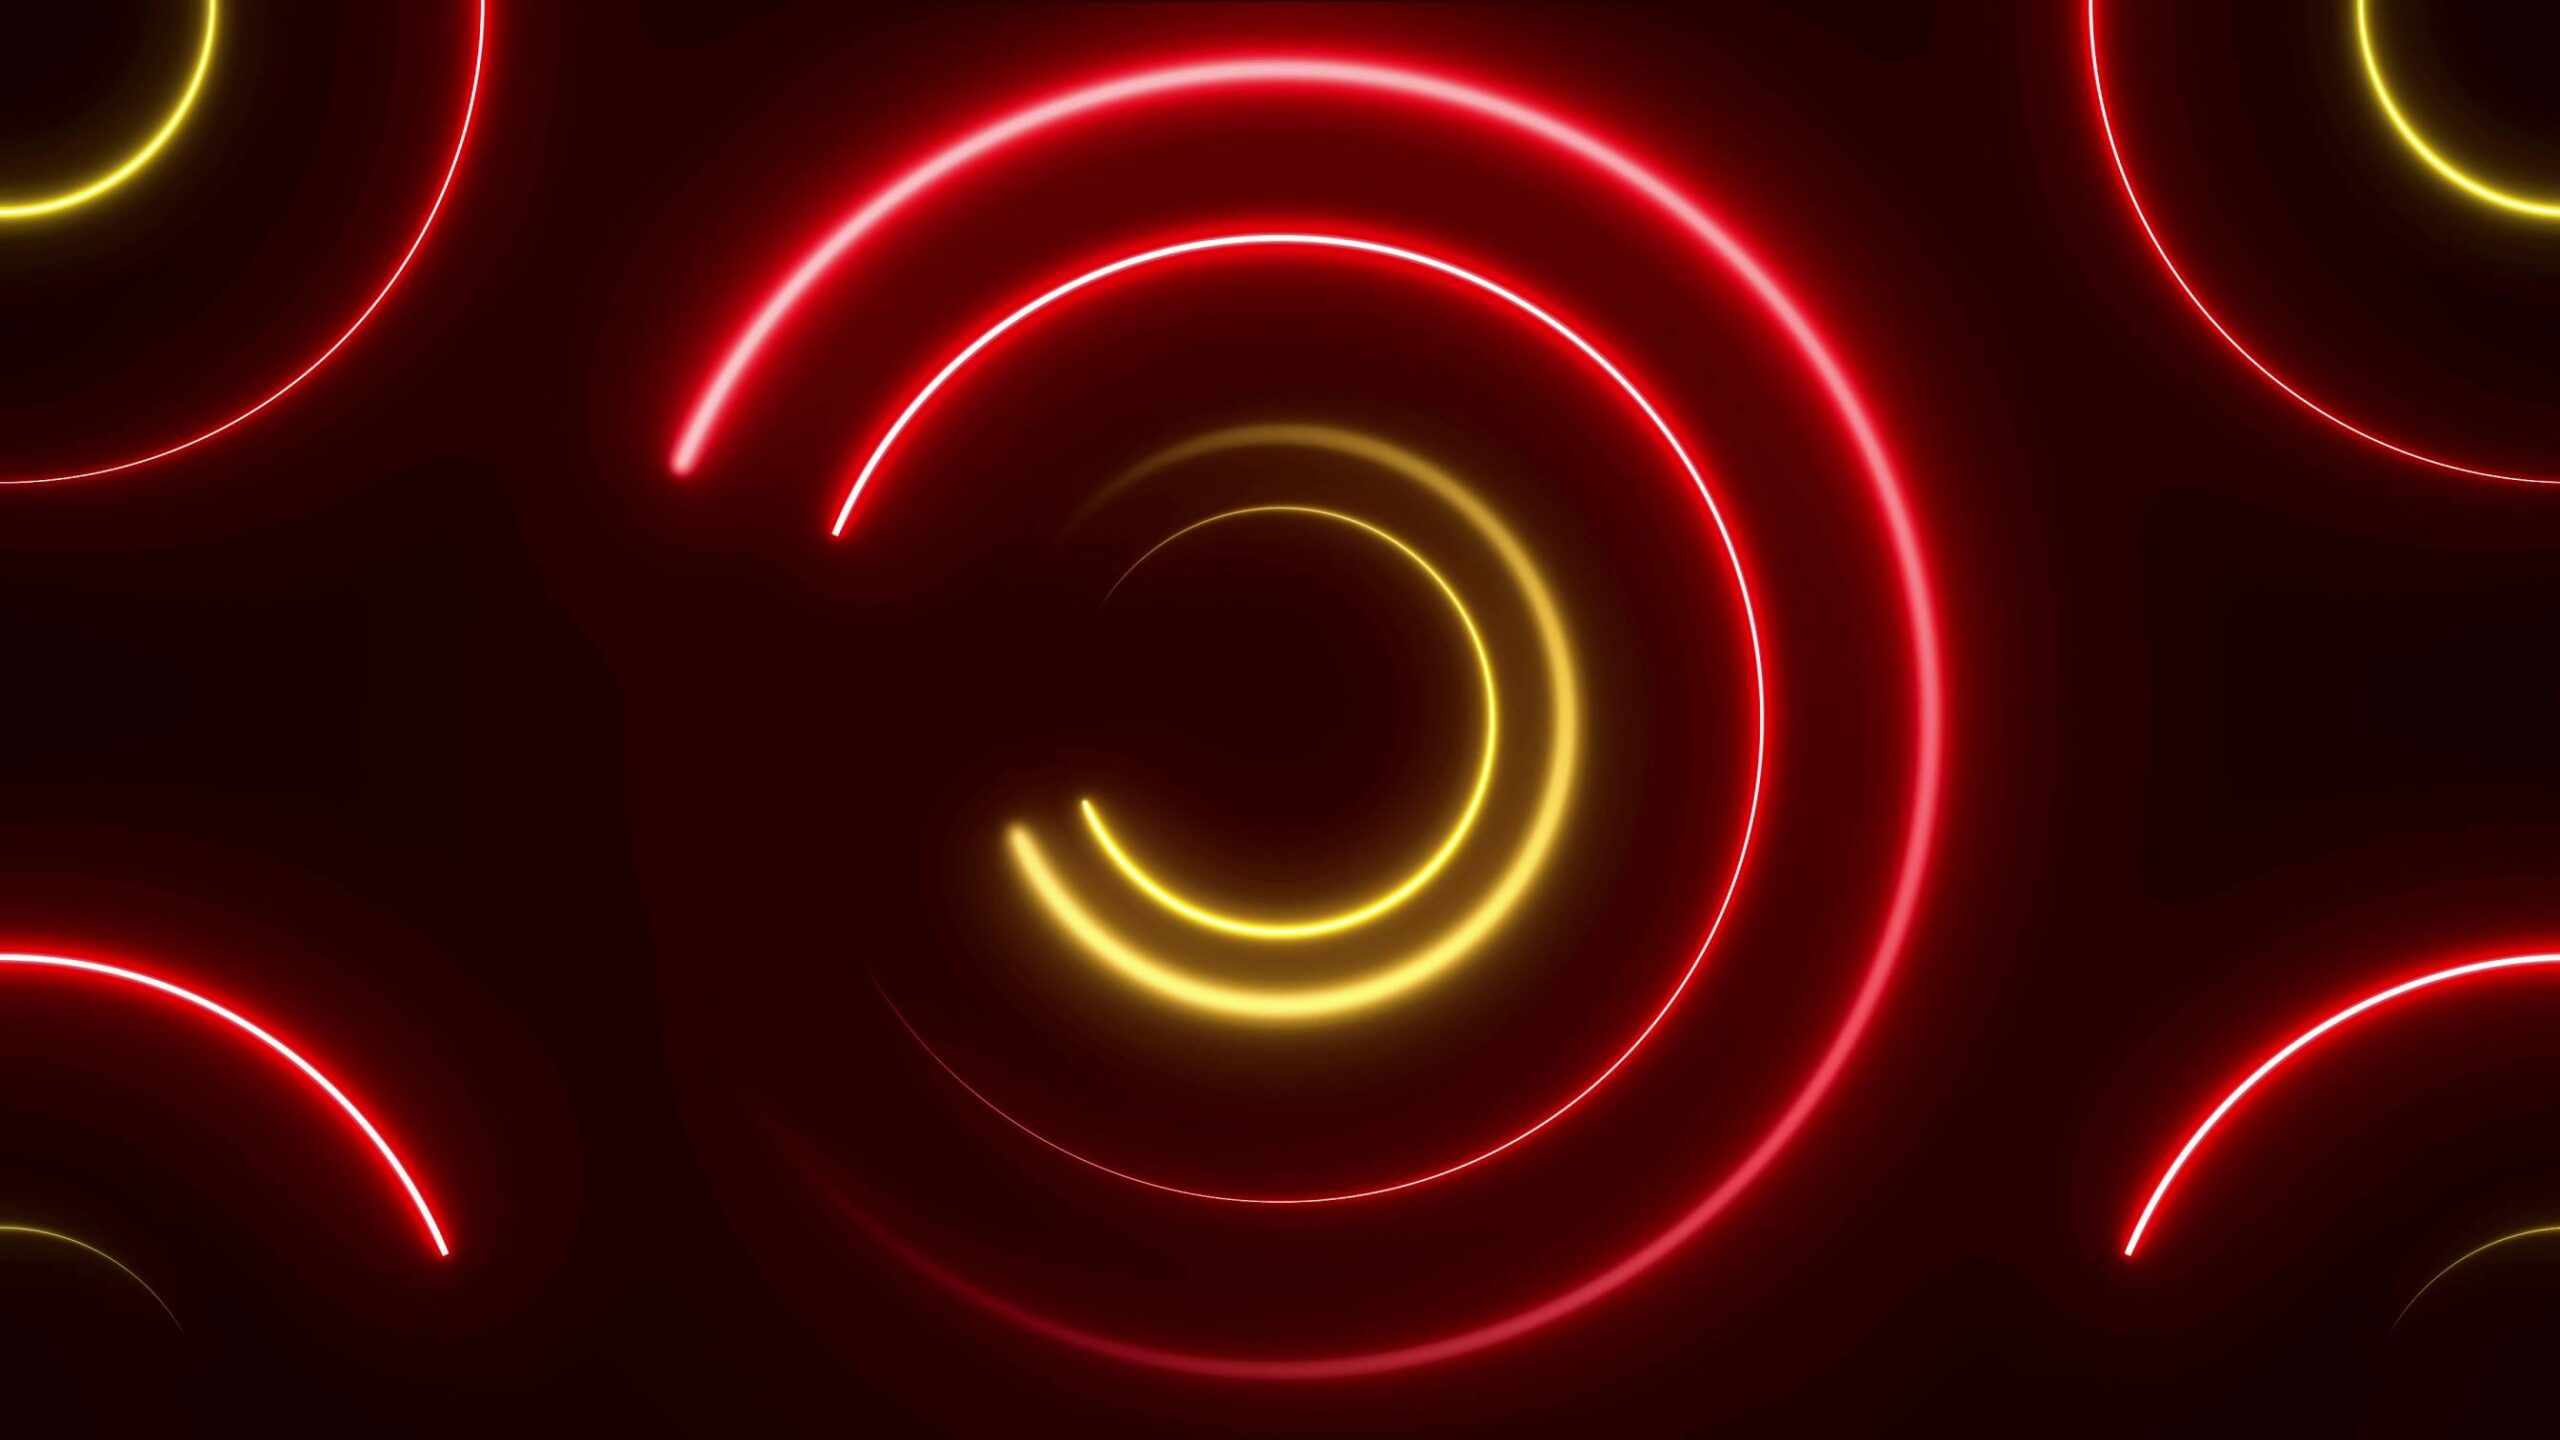 4K Red & Yellow Neon Screensaver || Free UHD Motion Background || Free Download